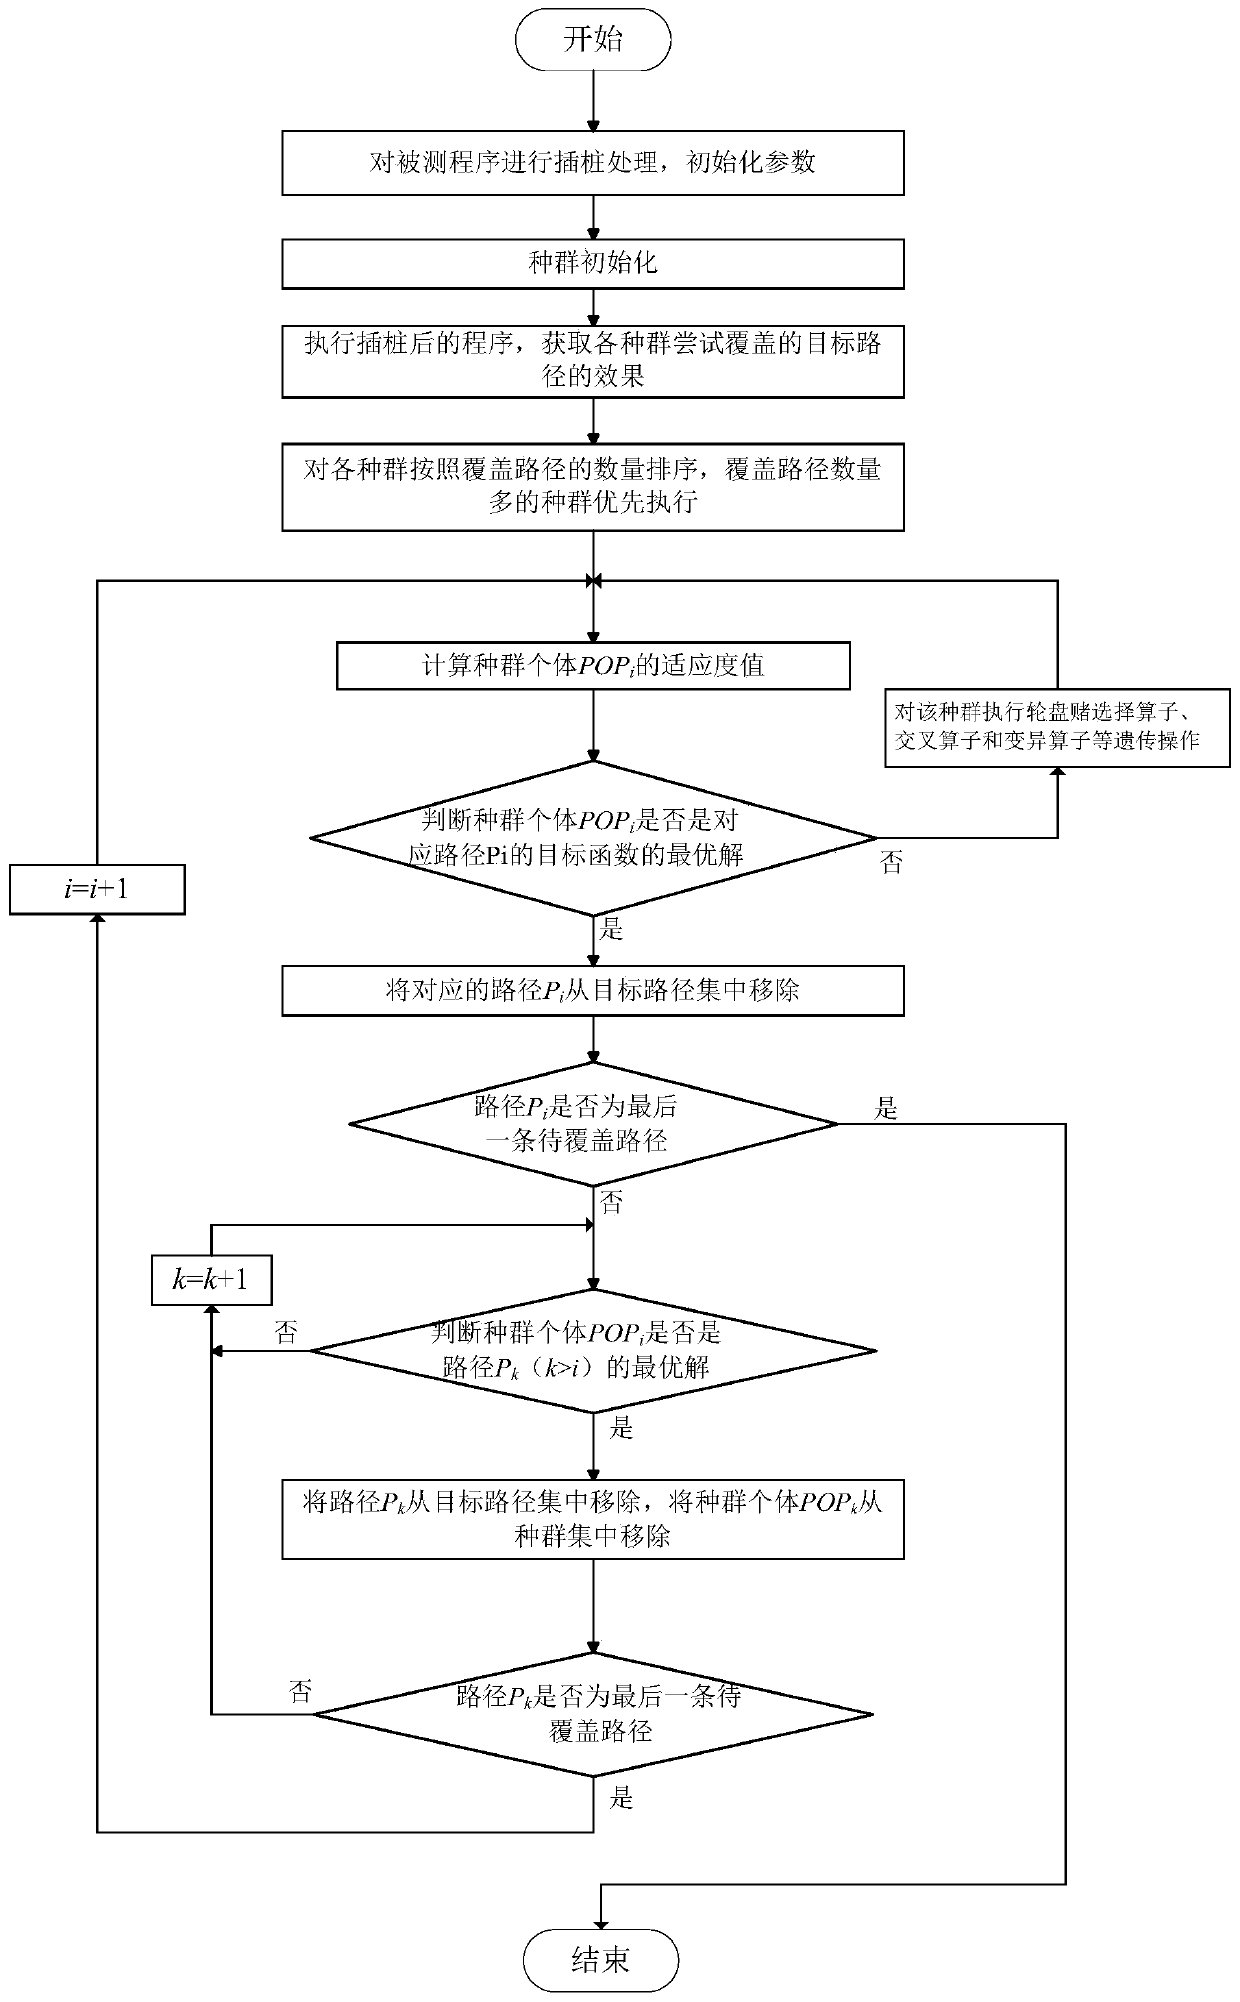 Multi-target path coverage test method for improving individual information sharing and implementation system